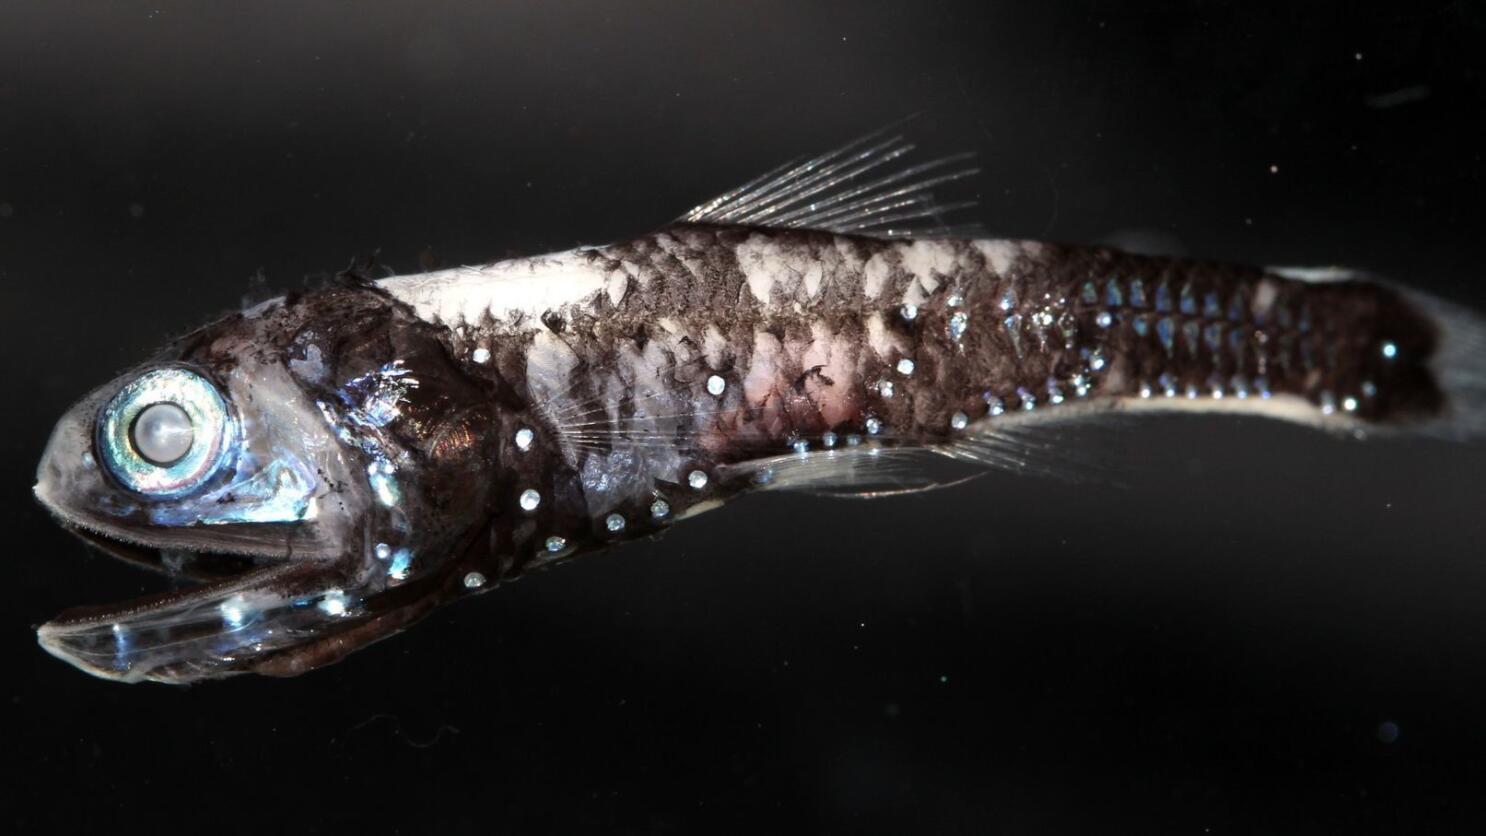 In a world cloaked in darkness, these fish may have a unique way